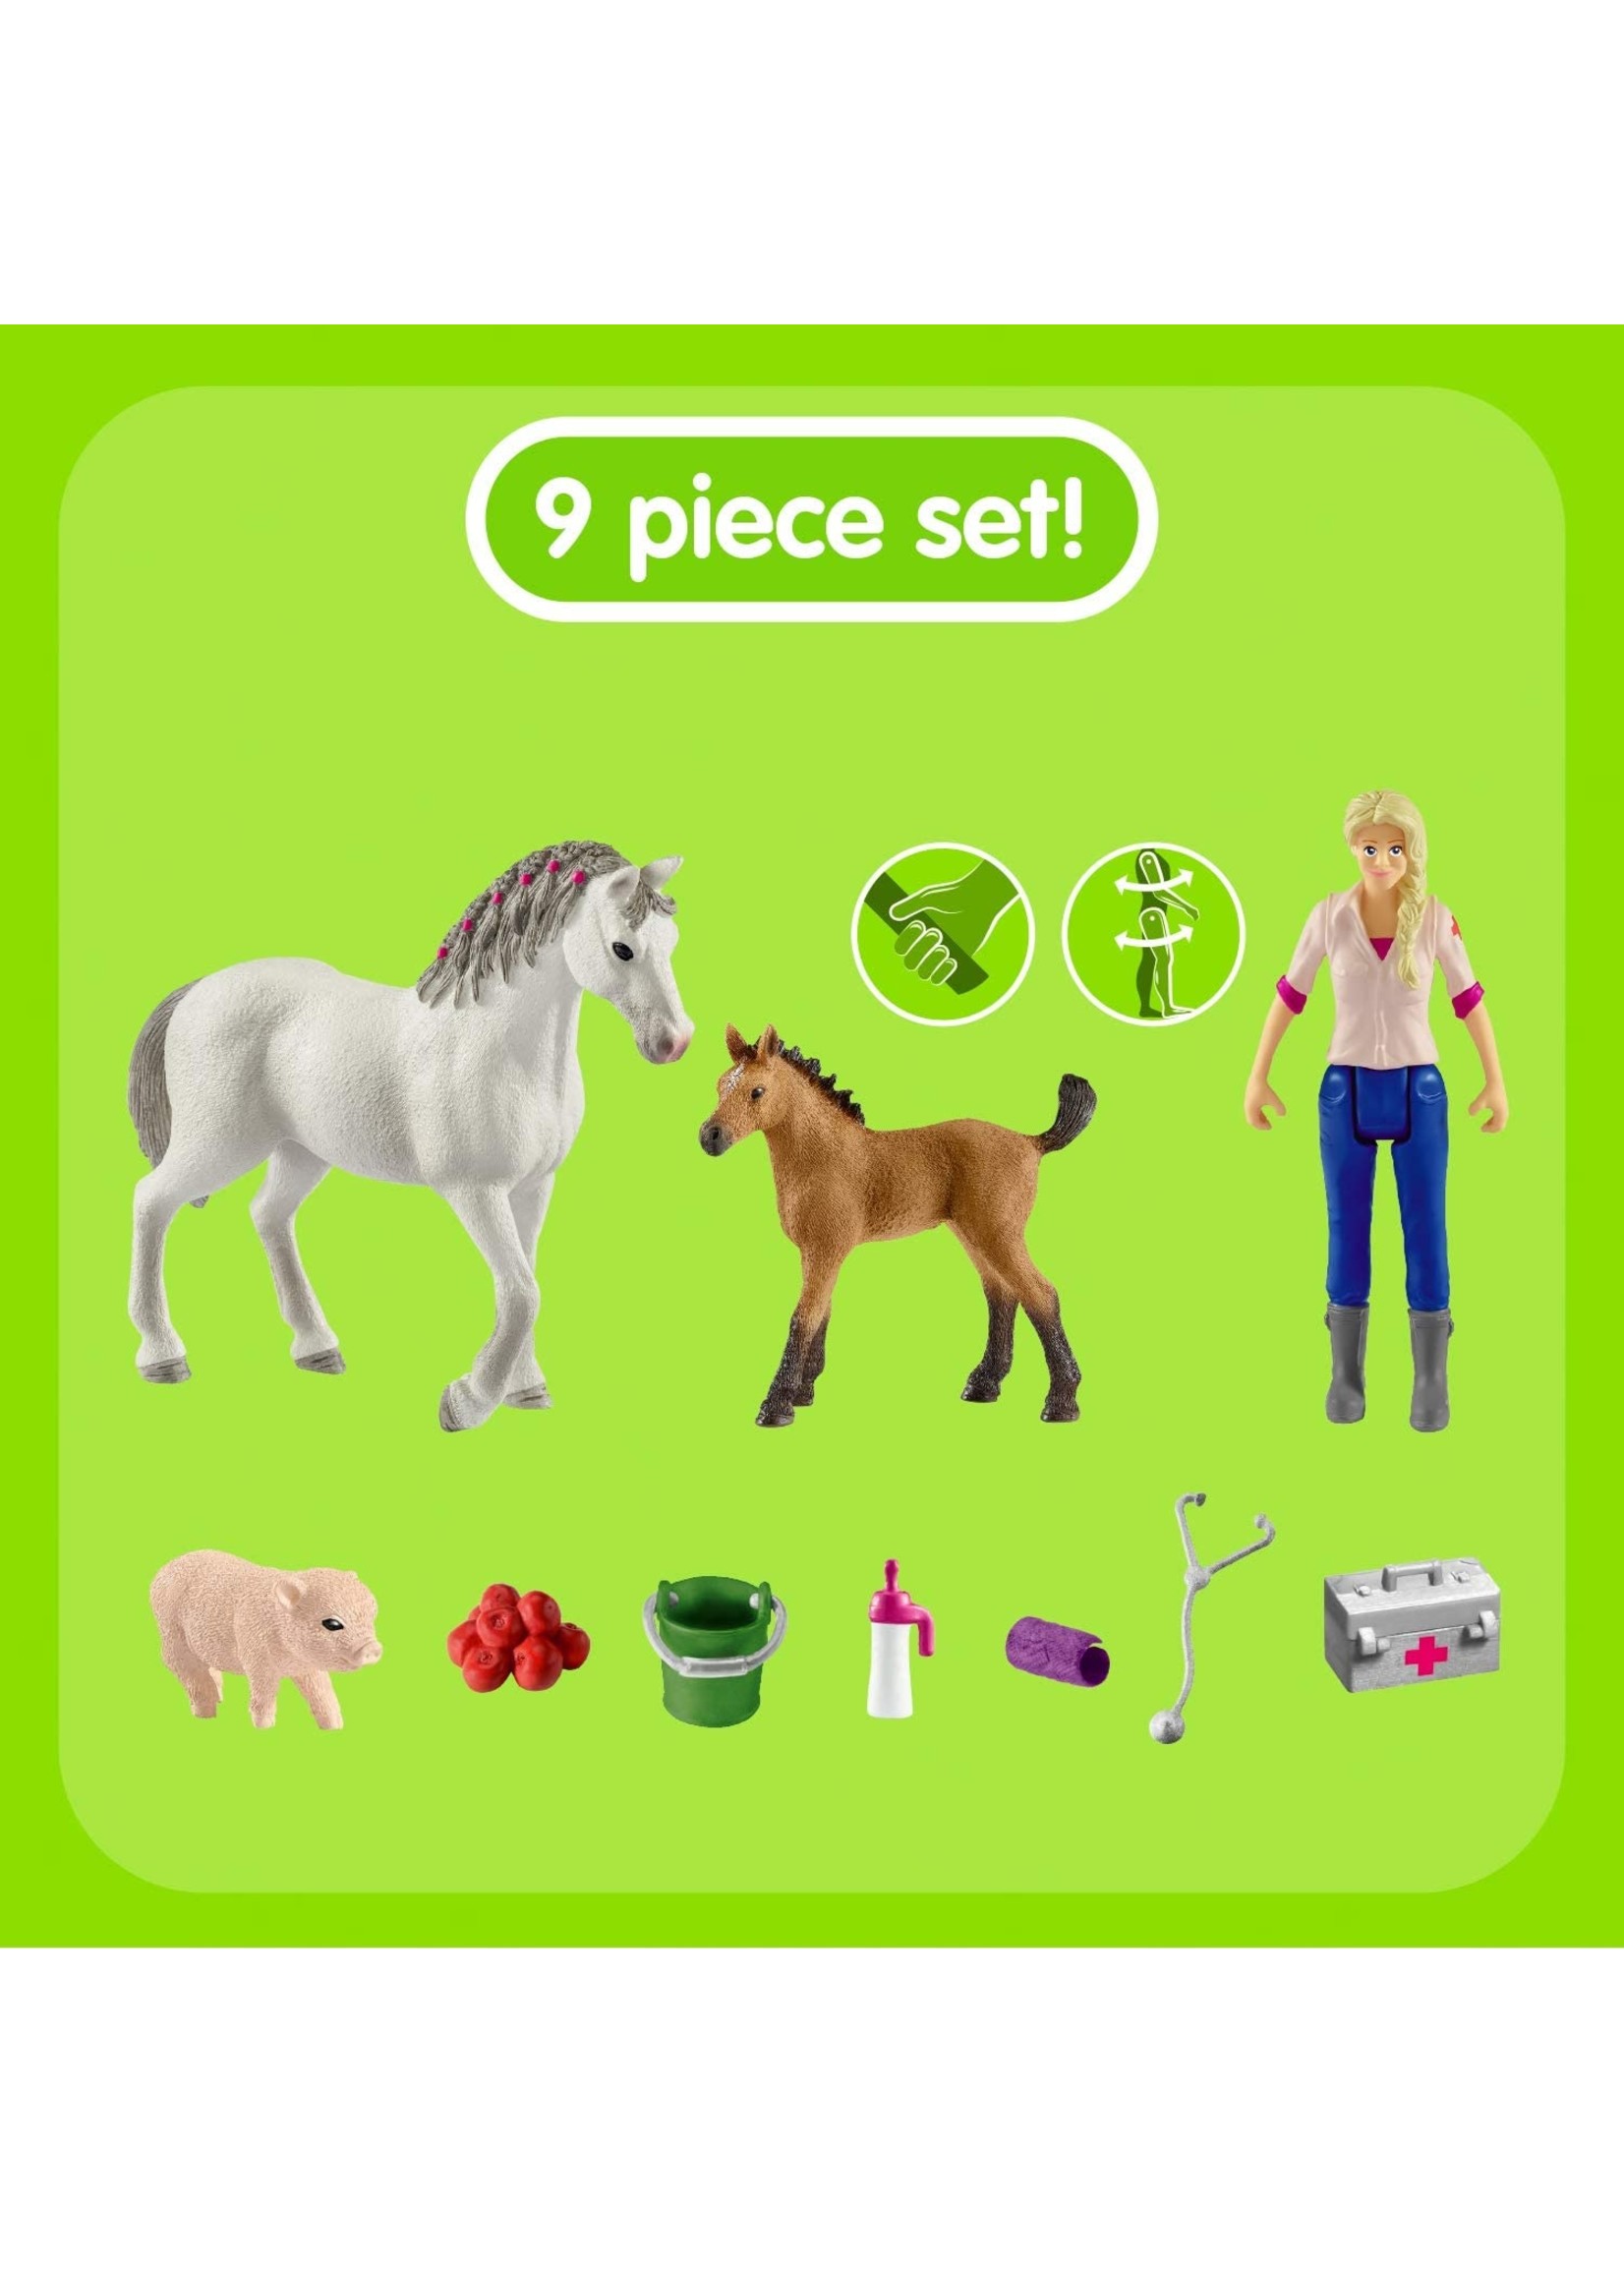 Schleich 42486 - Vet Visiting Mare & Foal